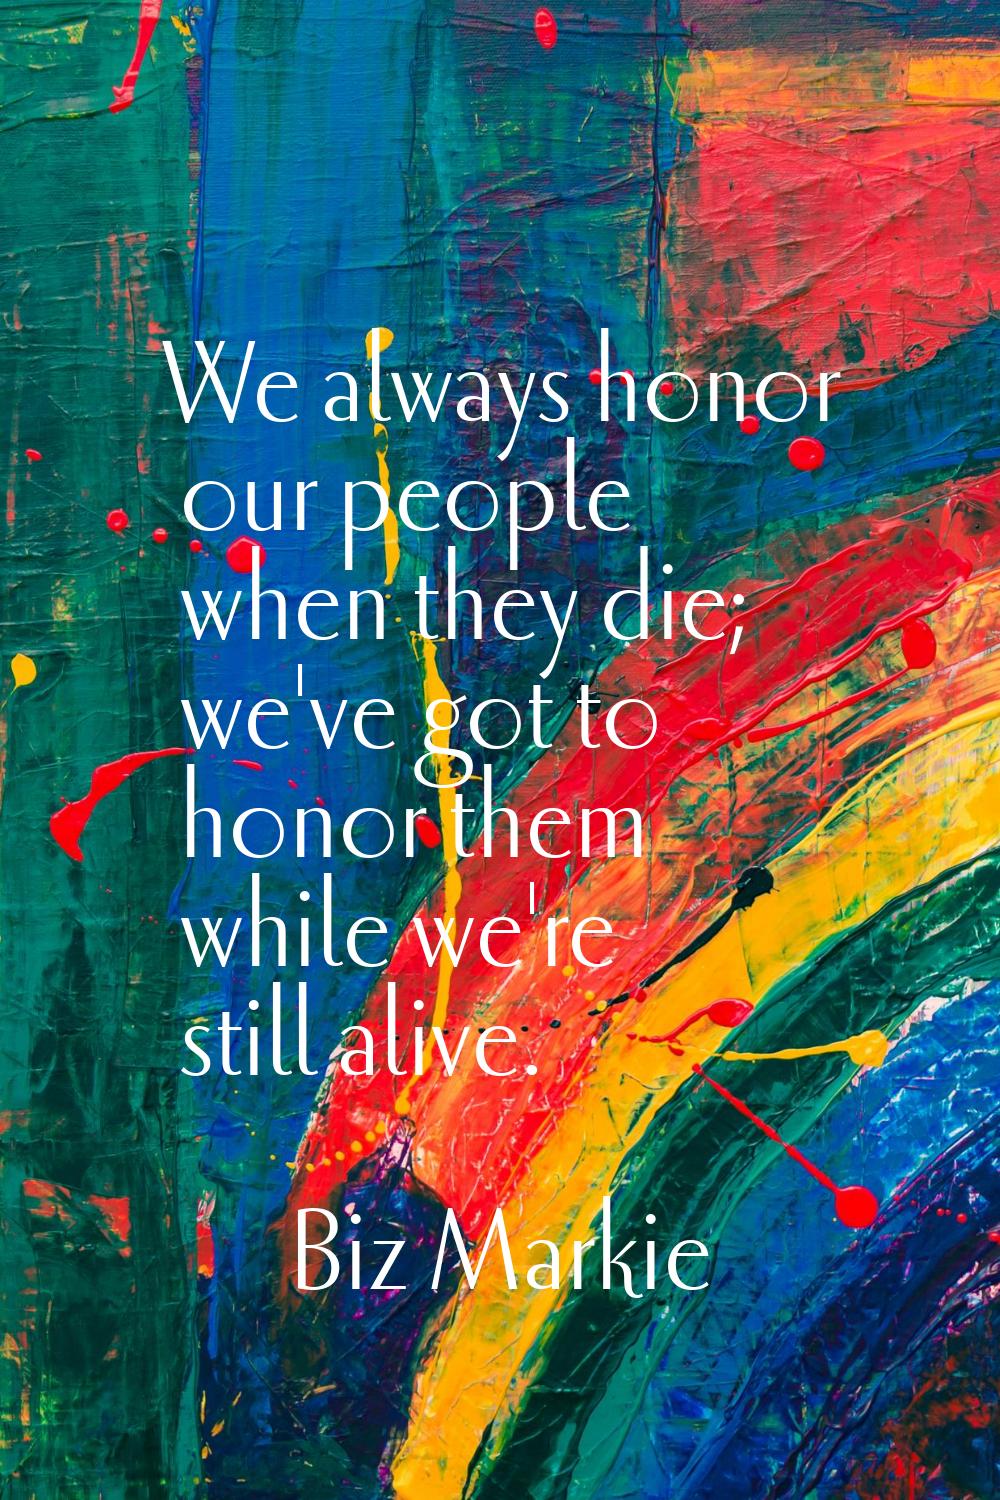 We always honor our people when they die; we've got to honor them while we're still alive.